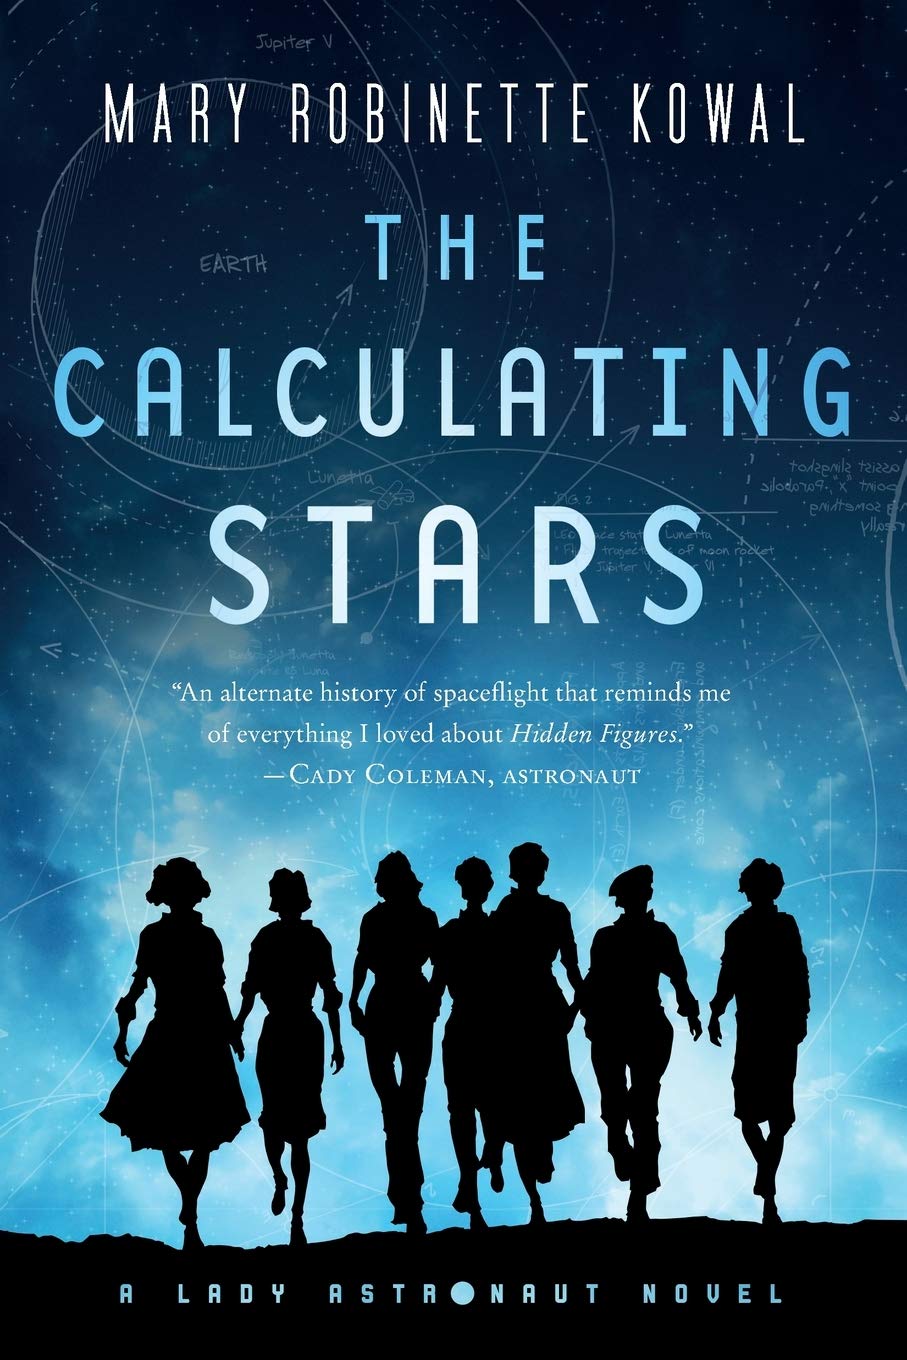 Image for "The Calculating Stars"